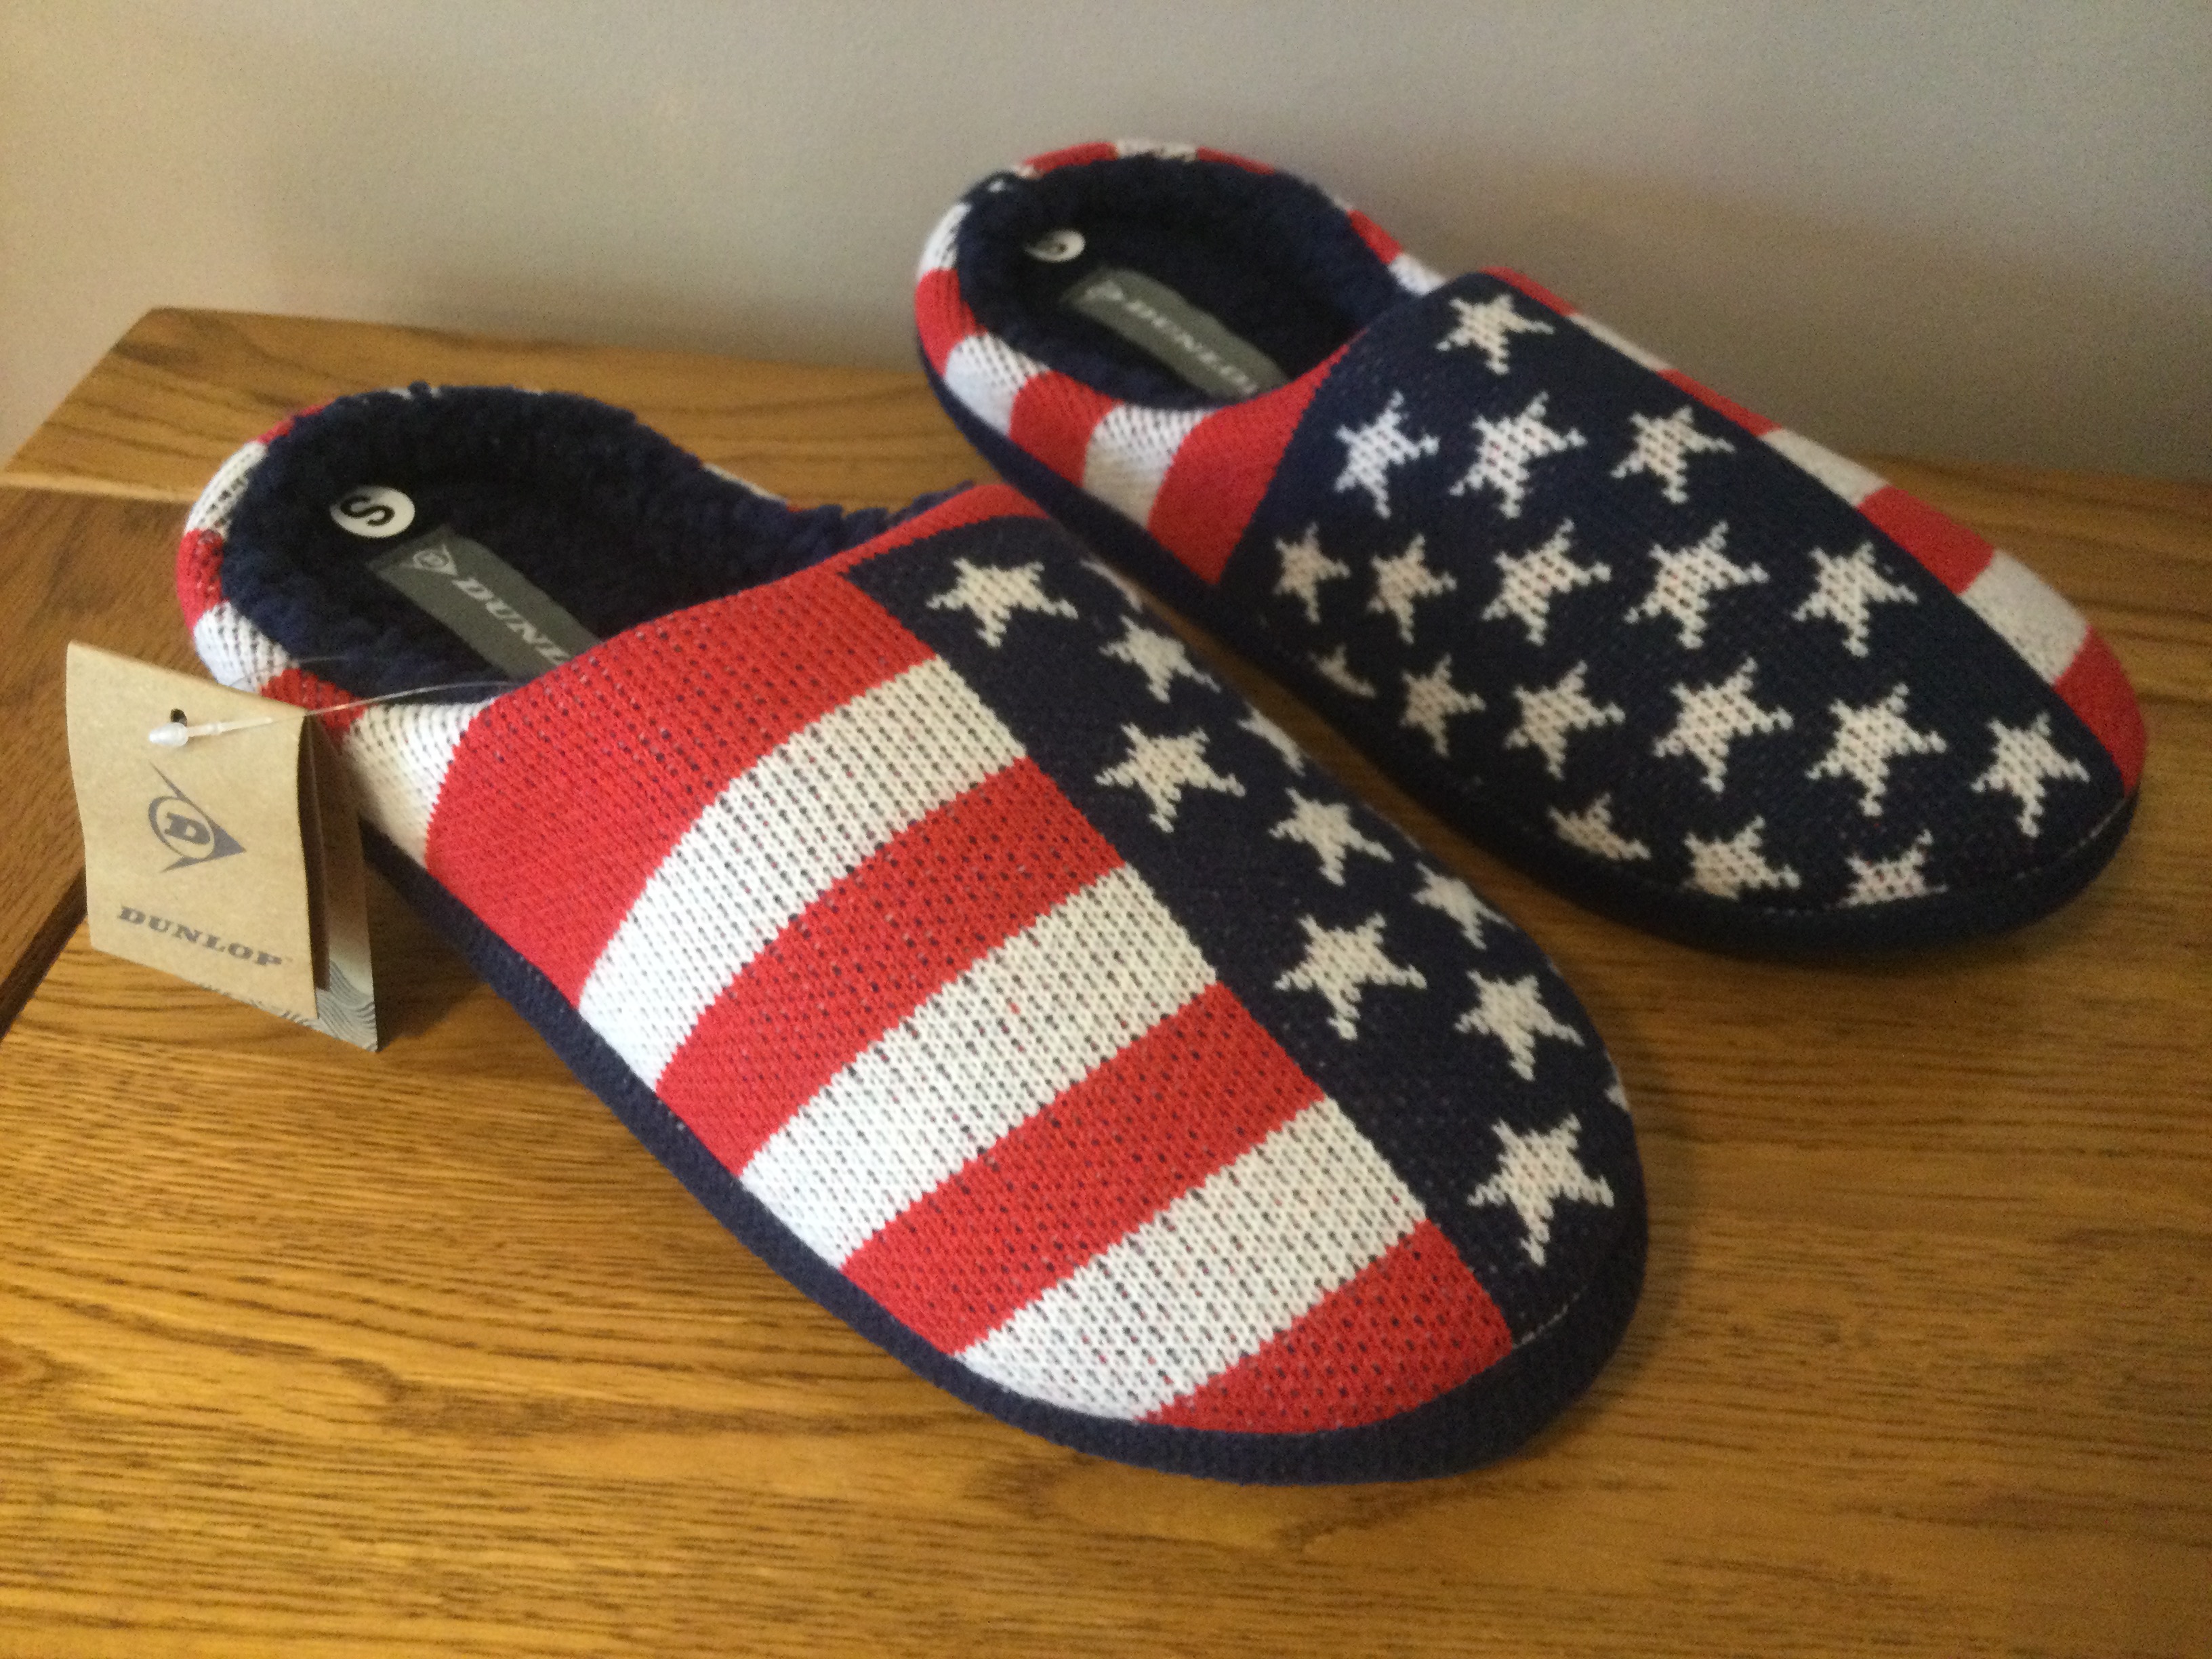 Mens Dunlop “USA Stars & Stripes” Memory Foam, Mule Slippers, Size S (6/7) - Image 3 of 4